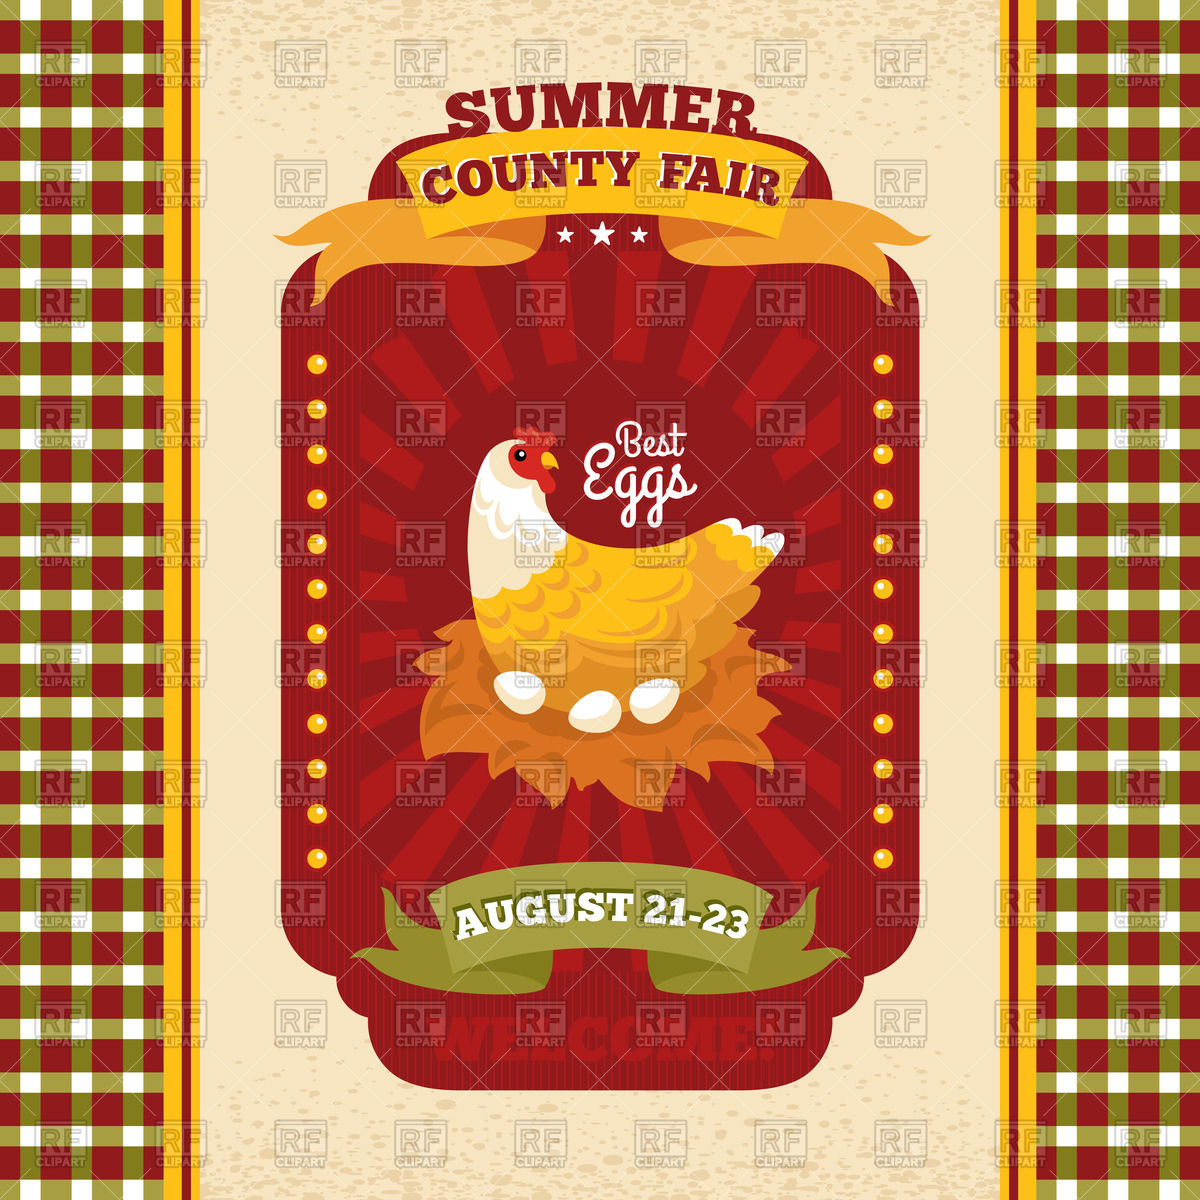 County Fair Vintage Invitation Card With Chicken In The Nest With Eggs    